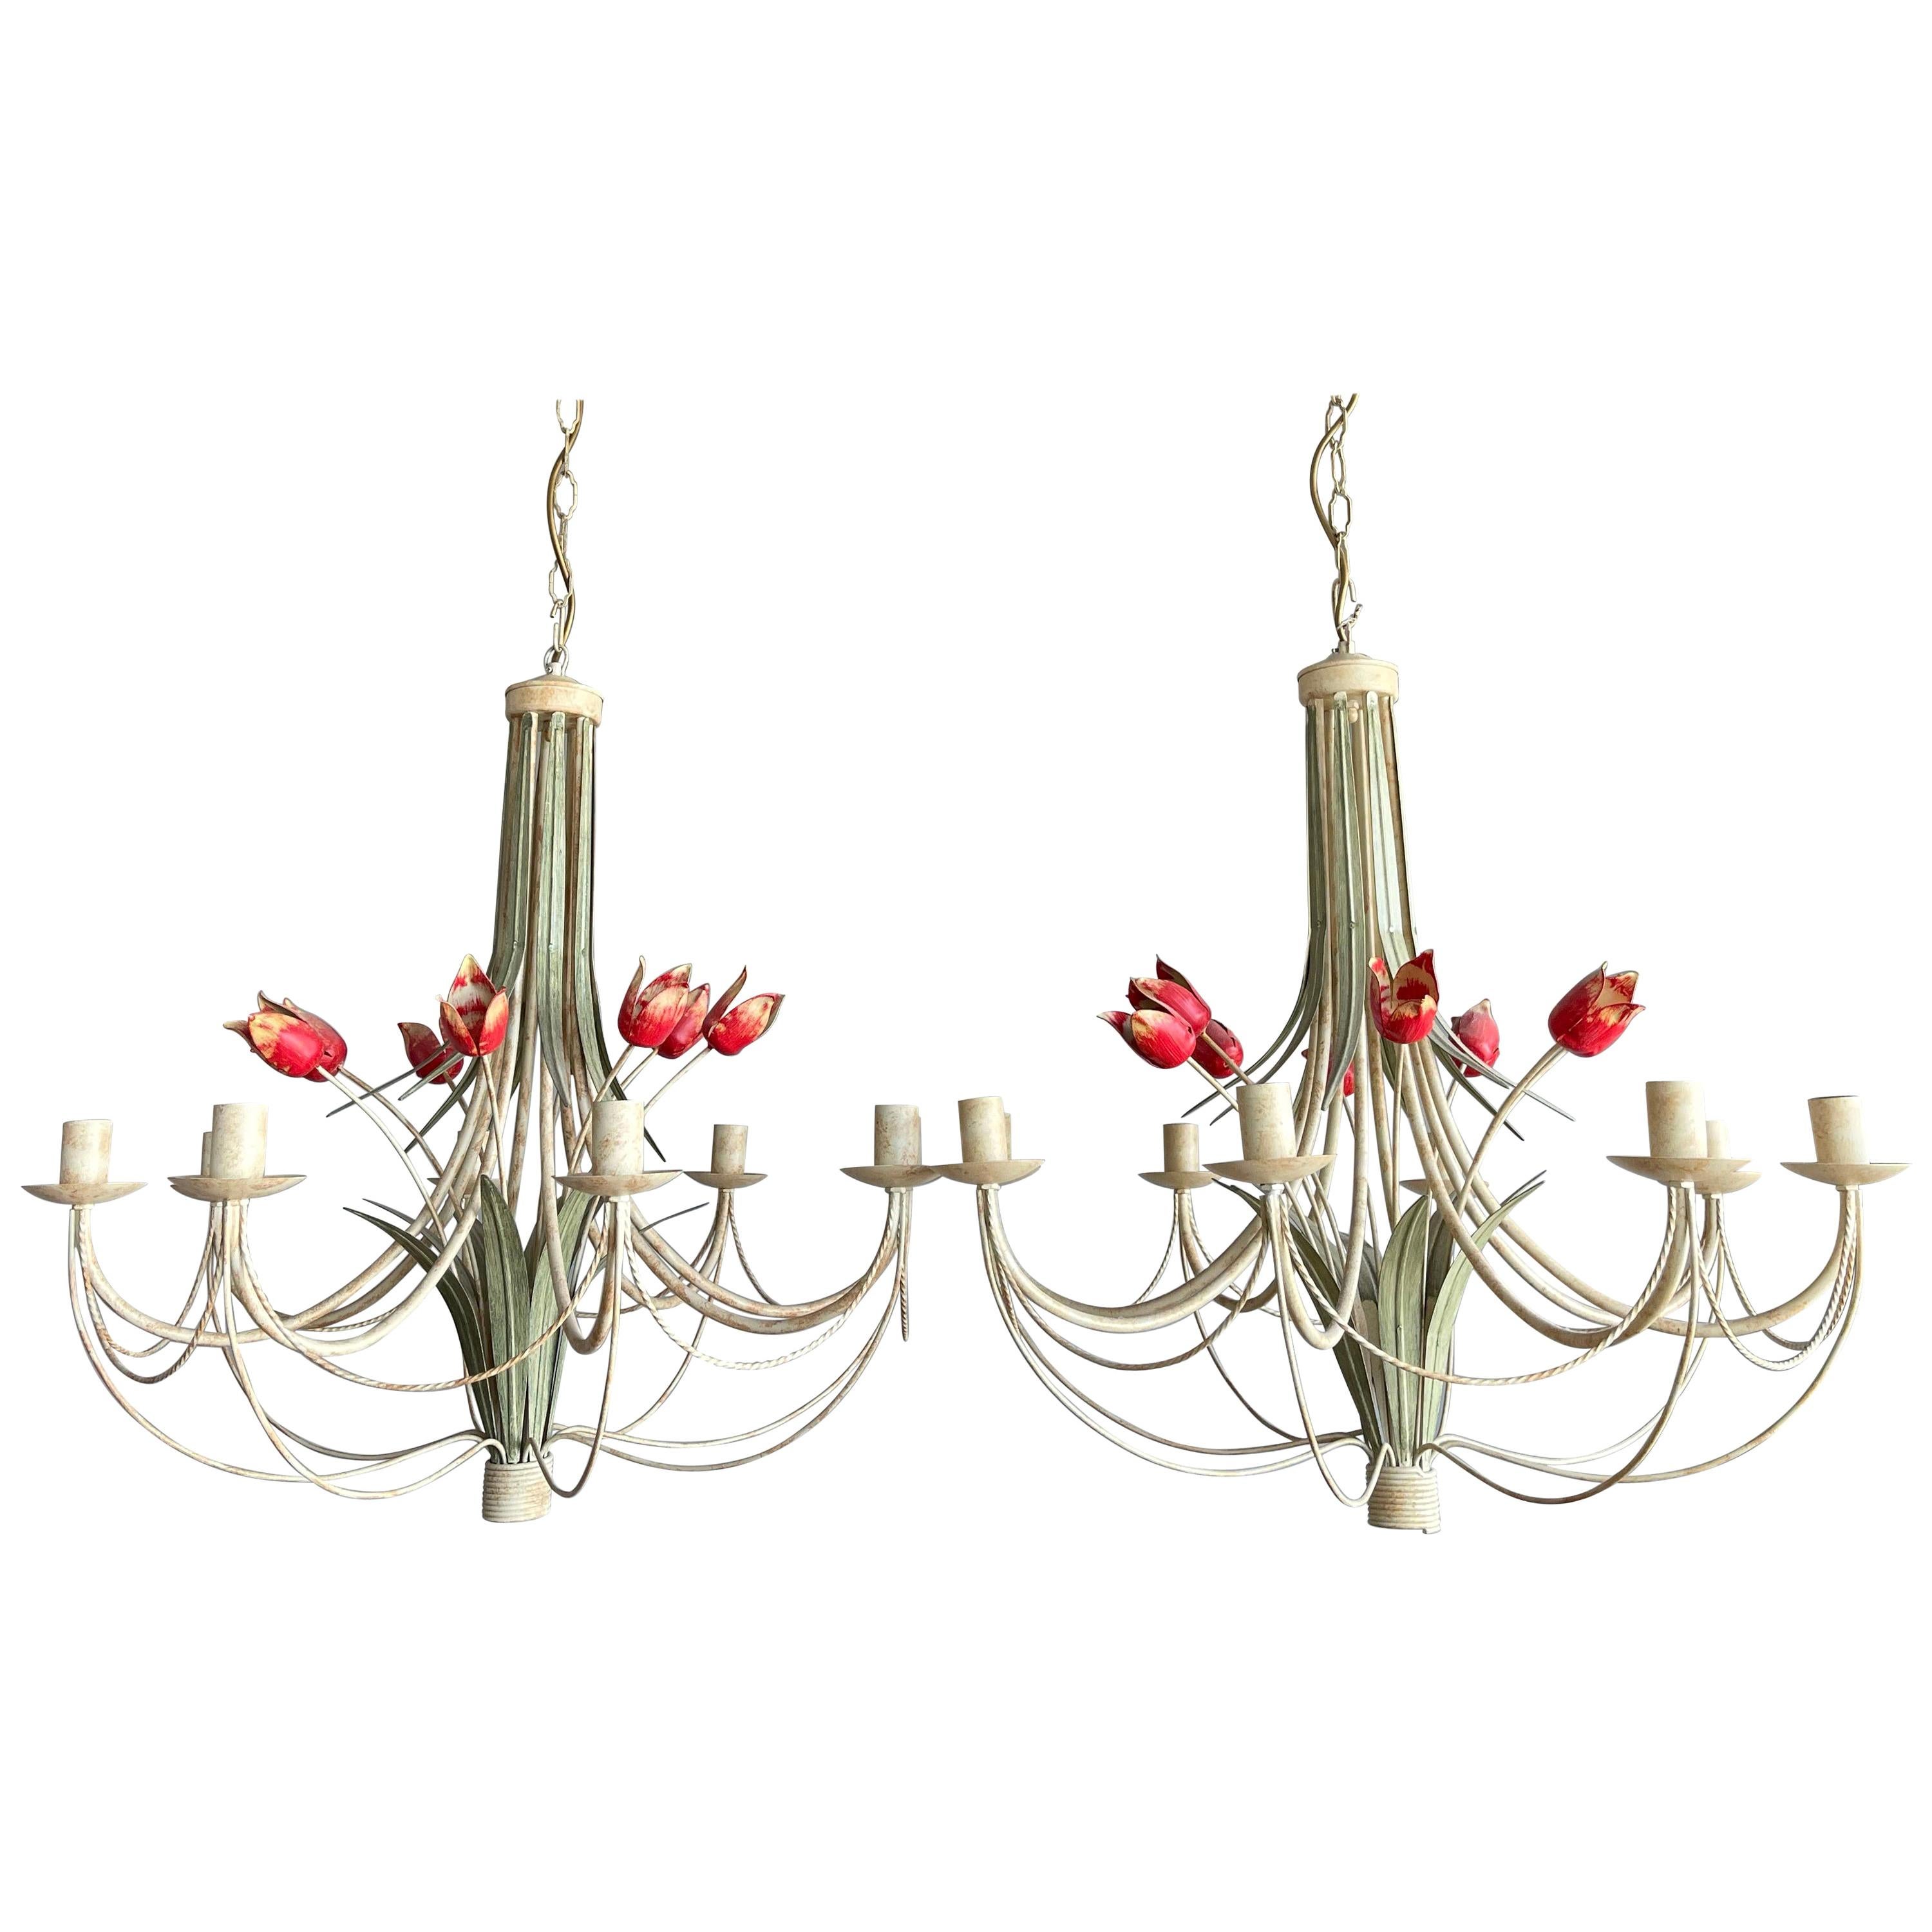 Stylish Midcentury Modern Large Pair of Metal Tulip Flower Bouquets Chandeliers